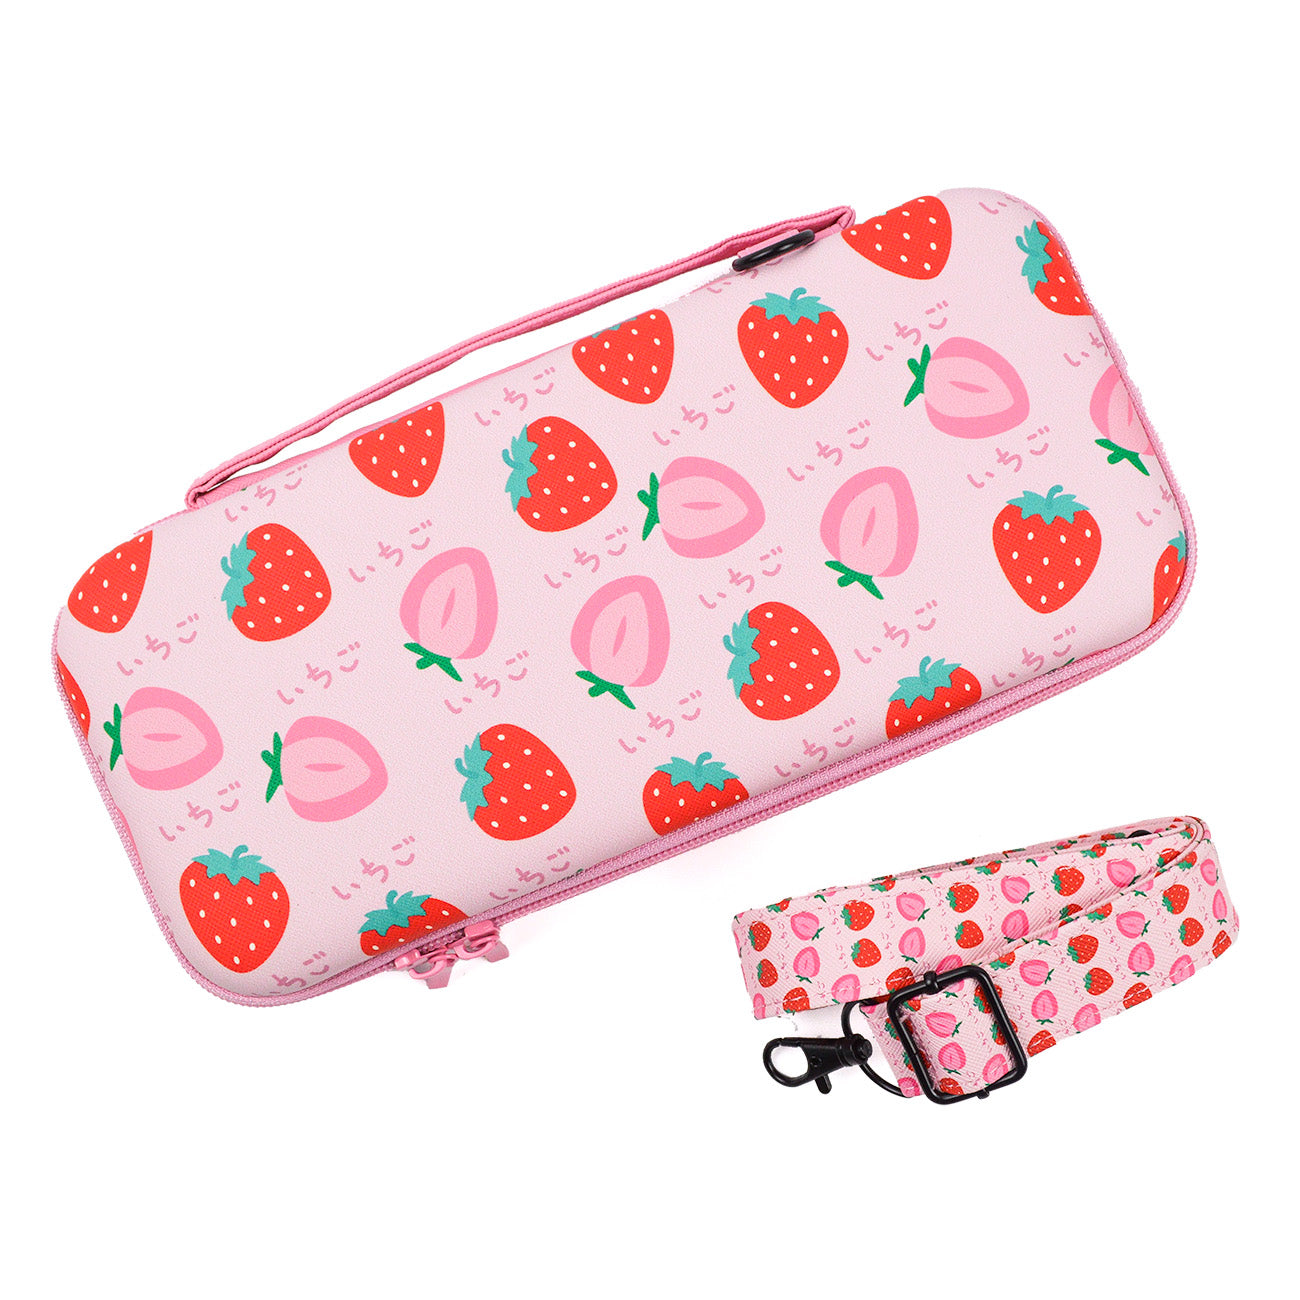 Fruity Carry Case for Nintendo Switch